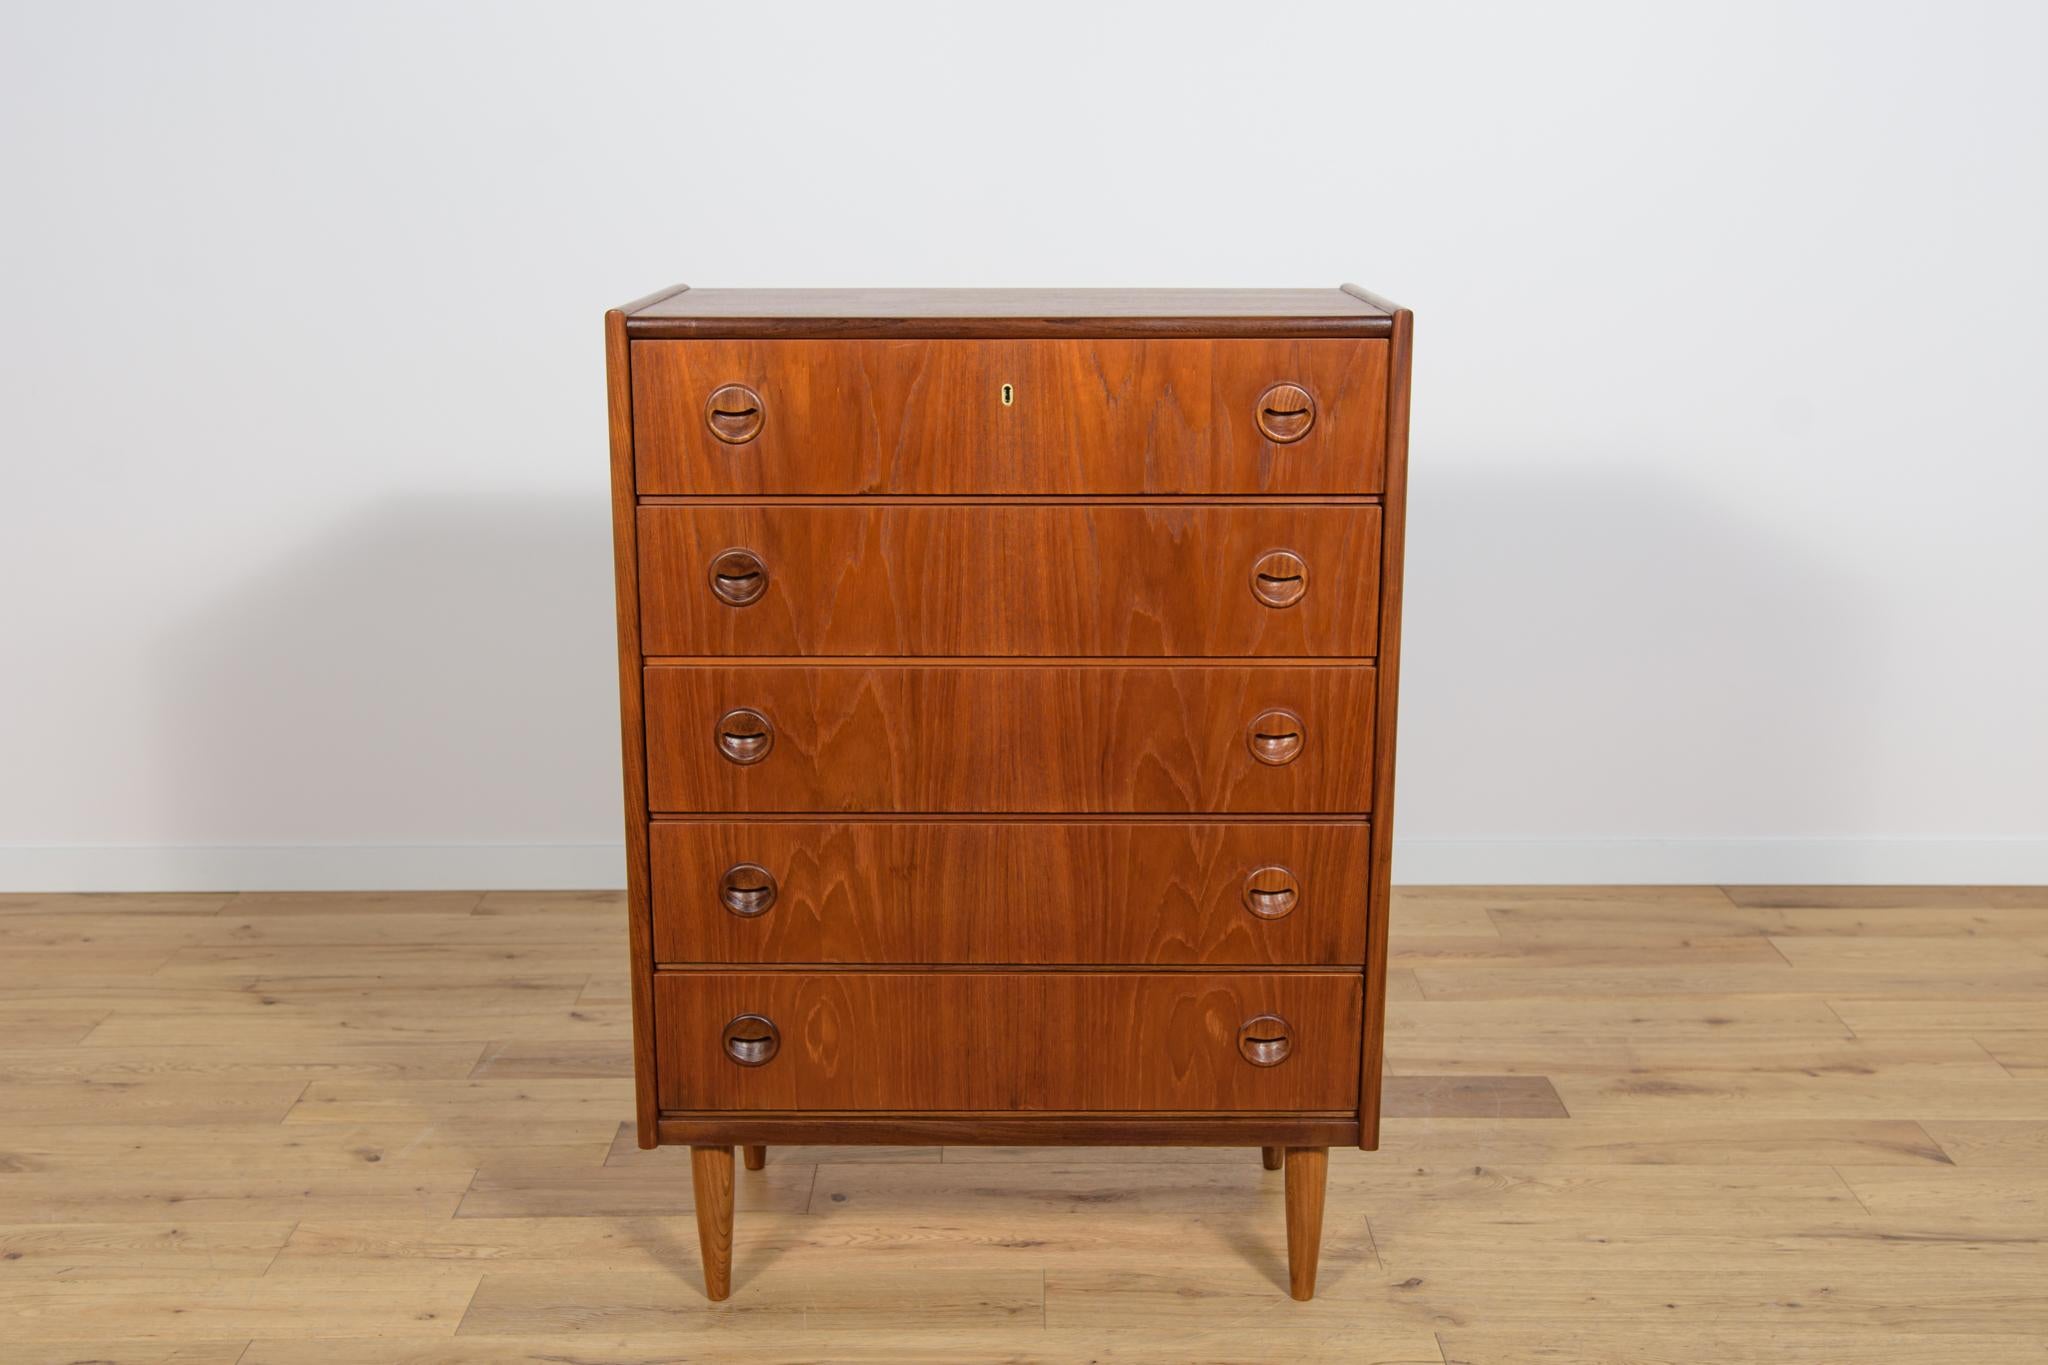 Teak dresser with five drawers made in the 1960s in Denmark. The dresser has contoured handles. The dresser has undergone a comprehensive carpentry renovation. The dresser has been cleaned of the old coating and finished with Danish  Oil.